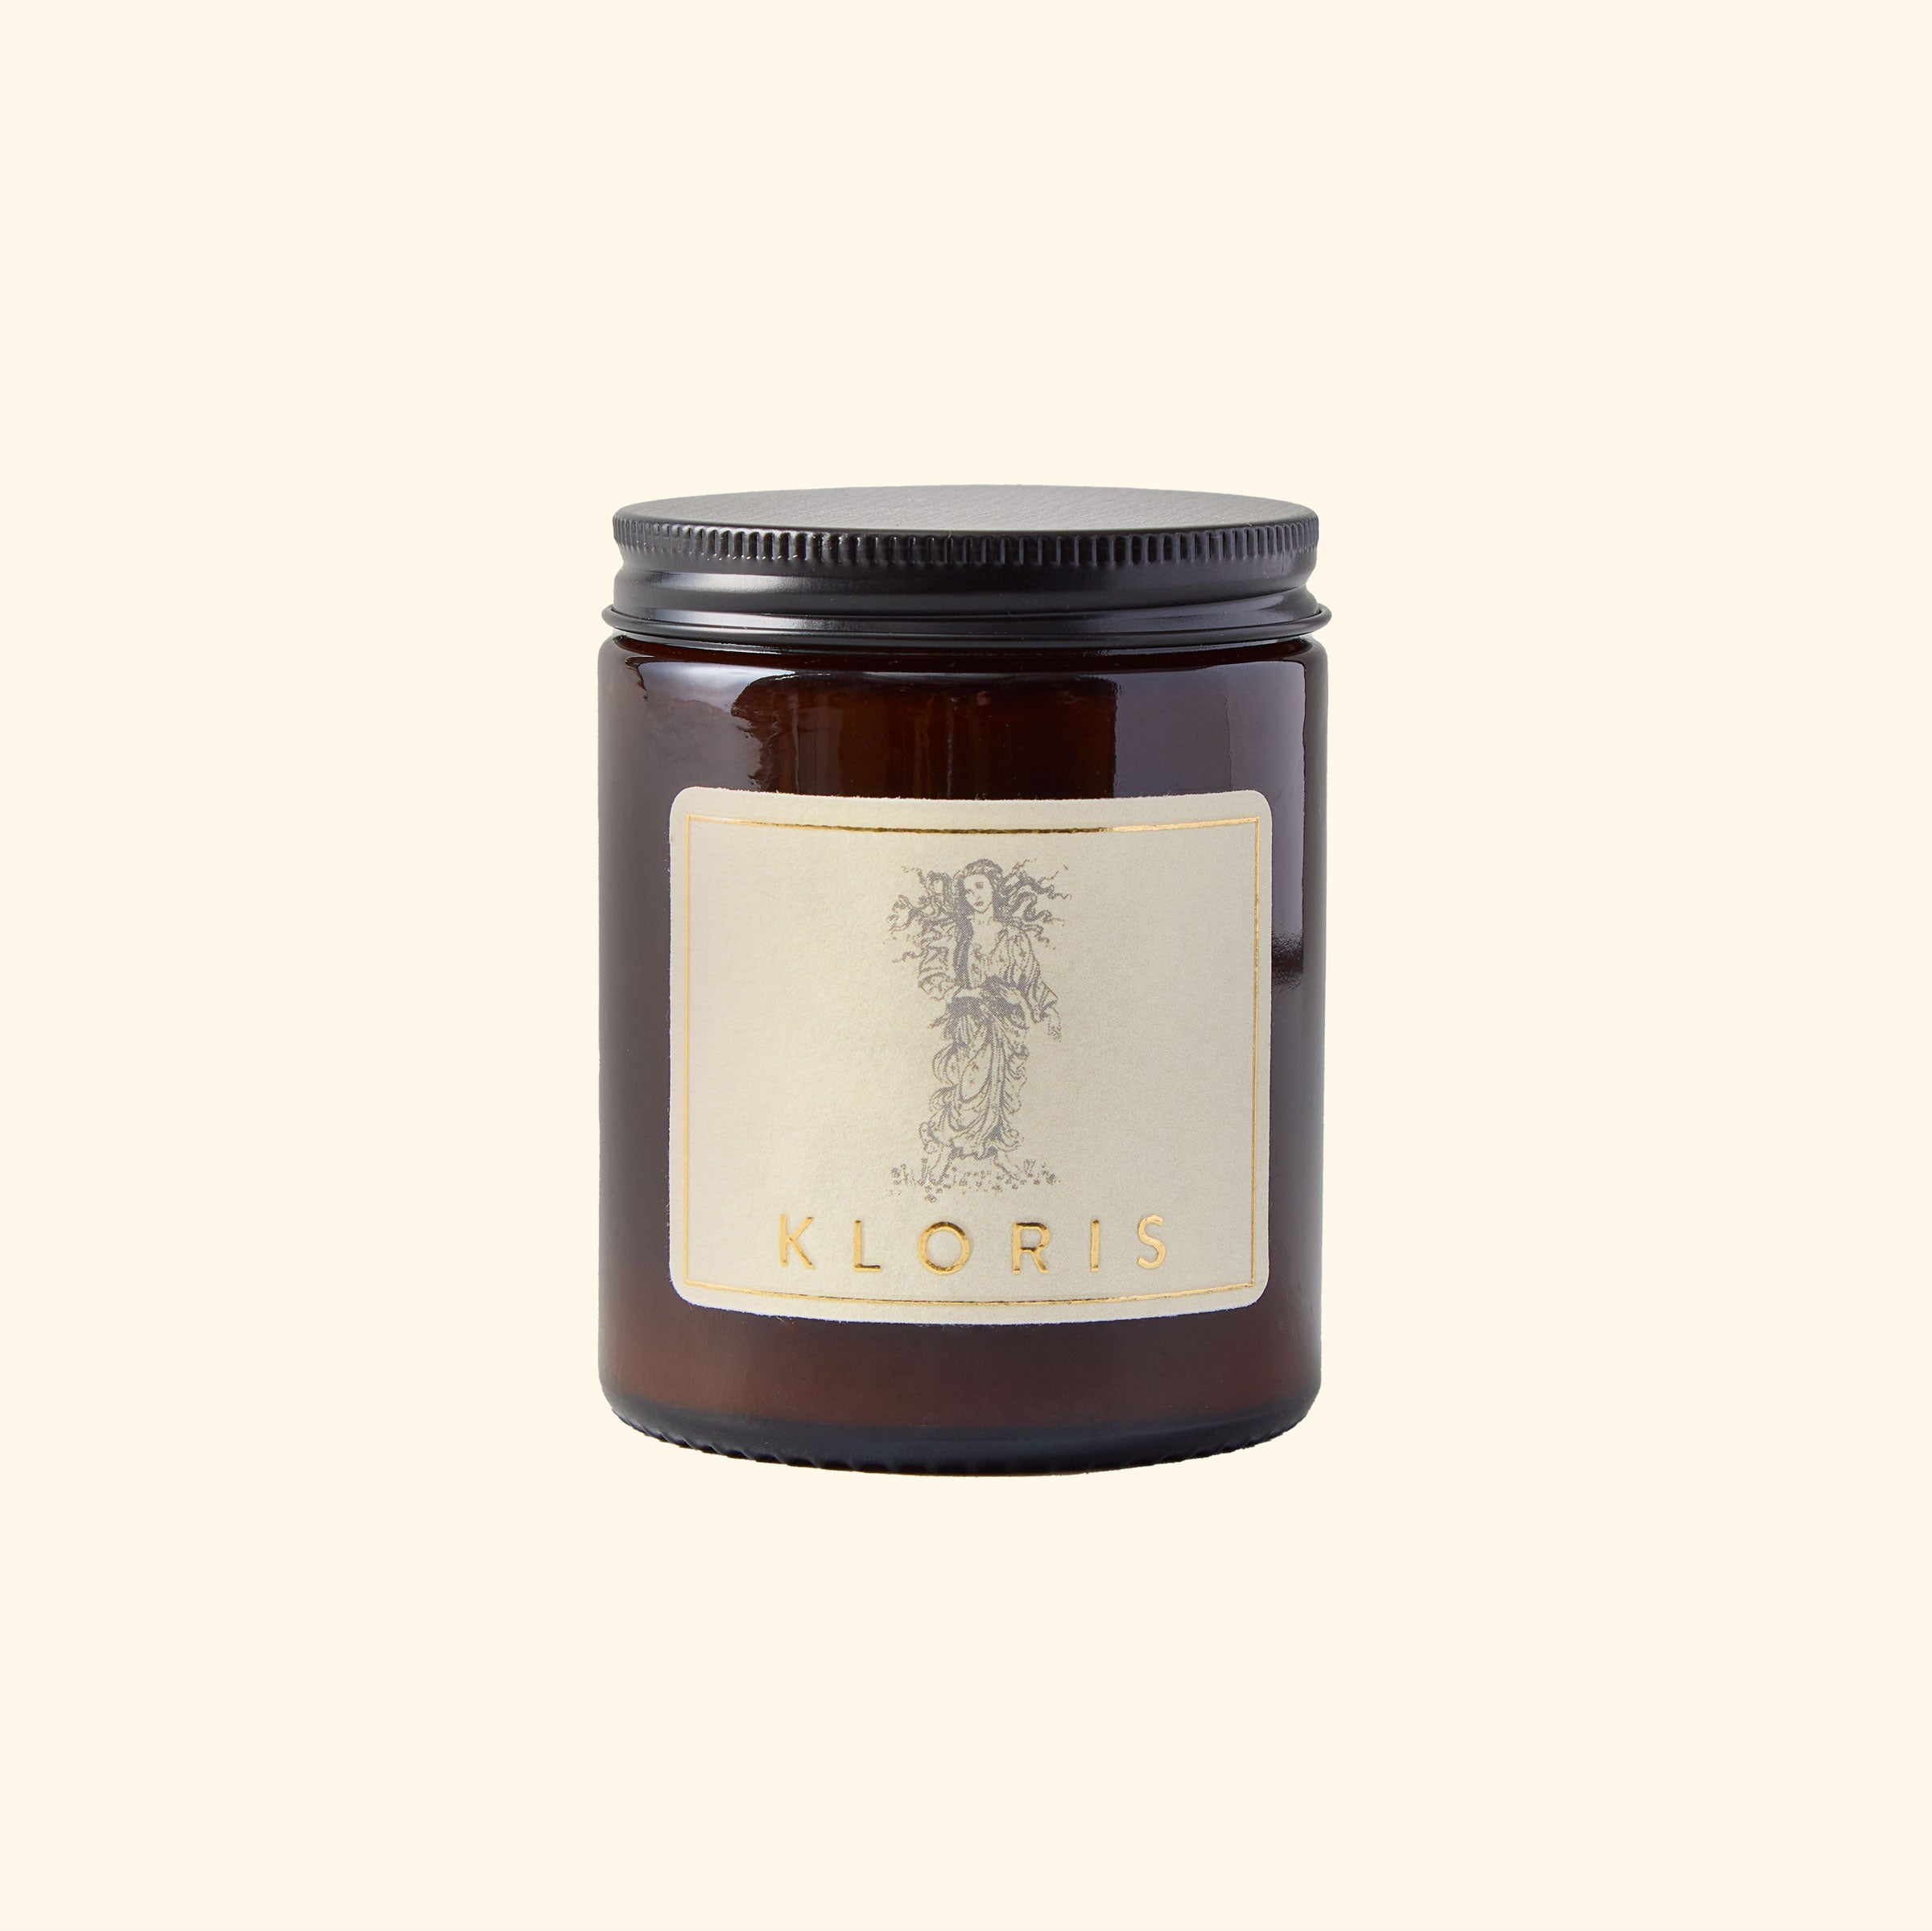 Soy wax natural candle